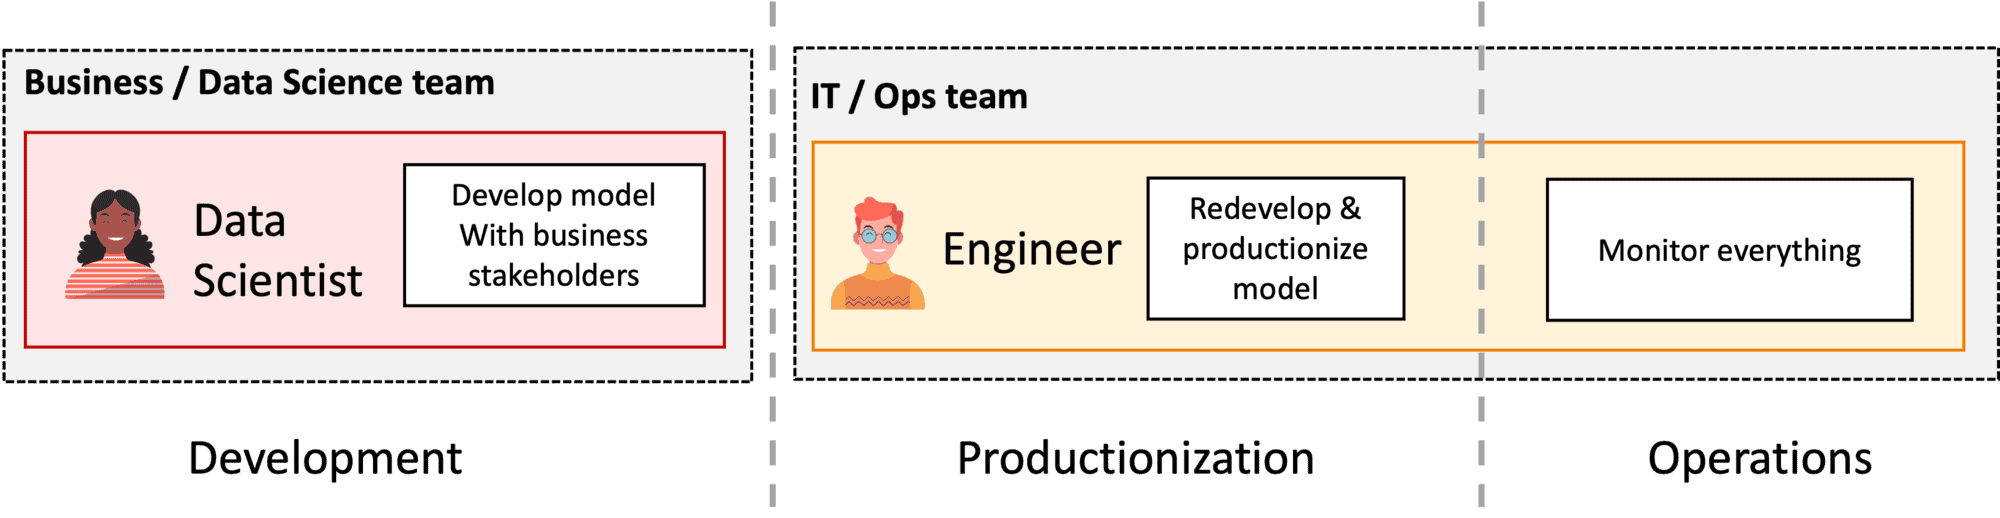 Figure 3: Team structure with split dev and ops.